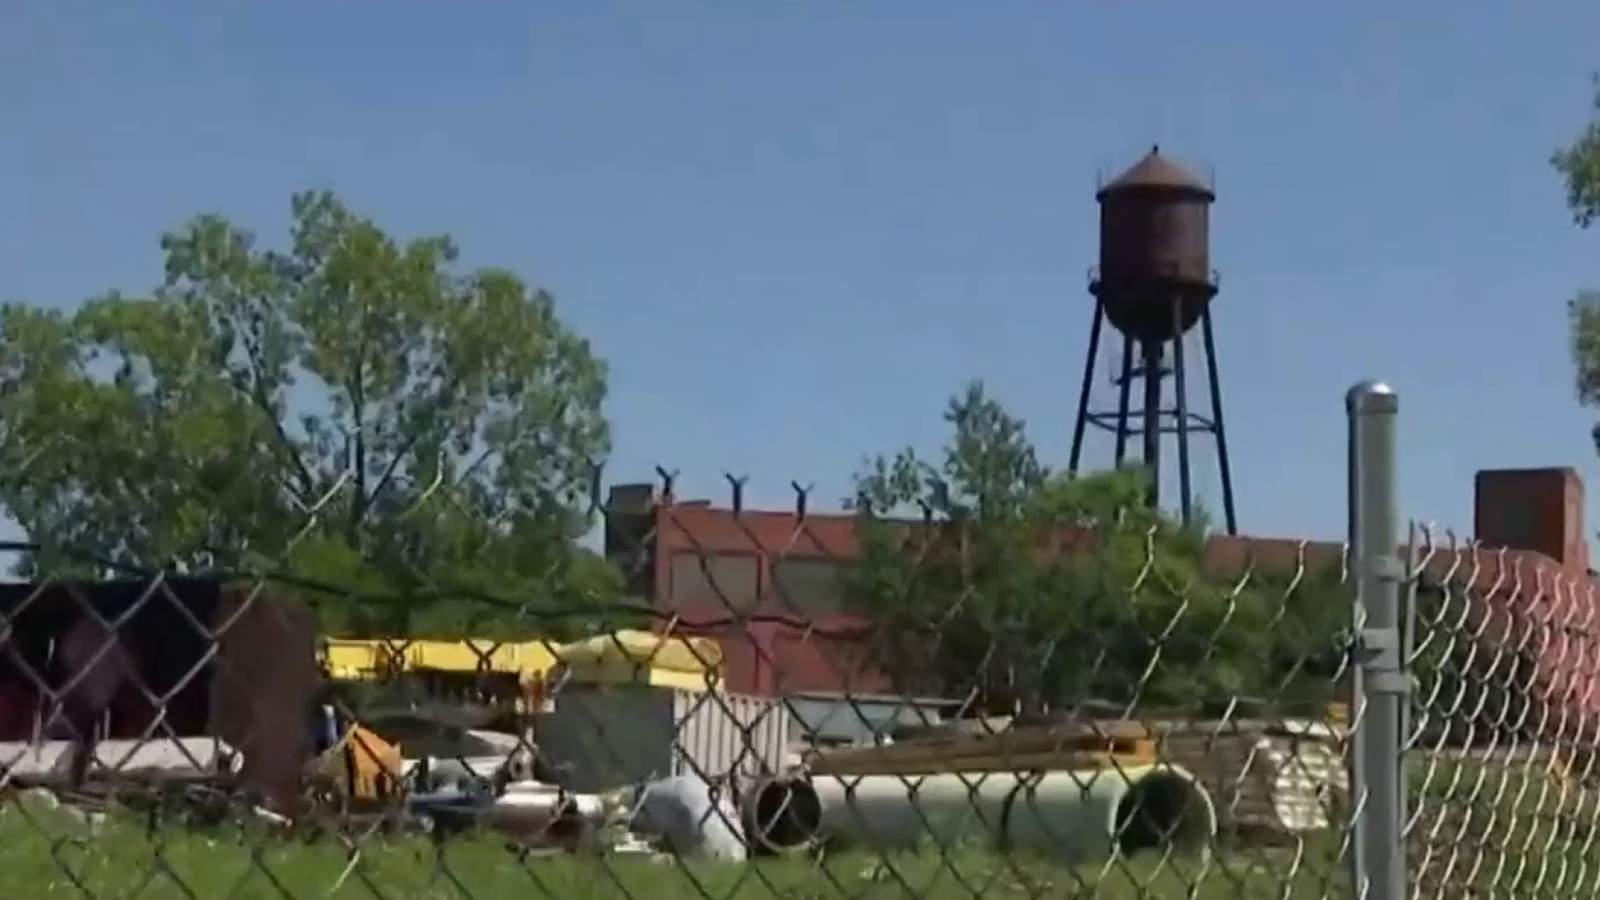 Owner of toxic green ooze site in new legal battle over Detroit property